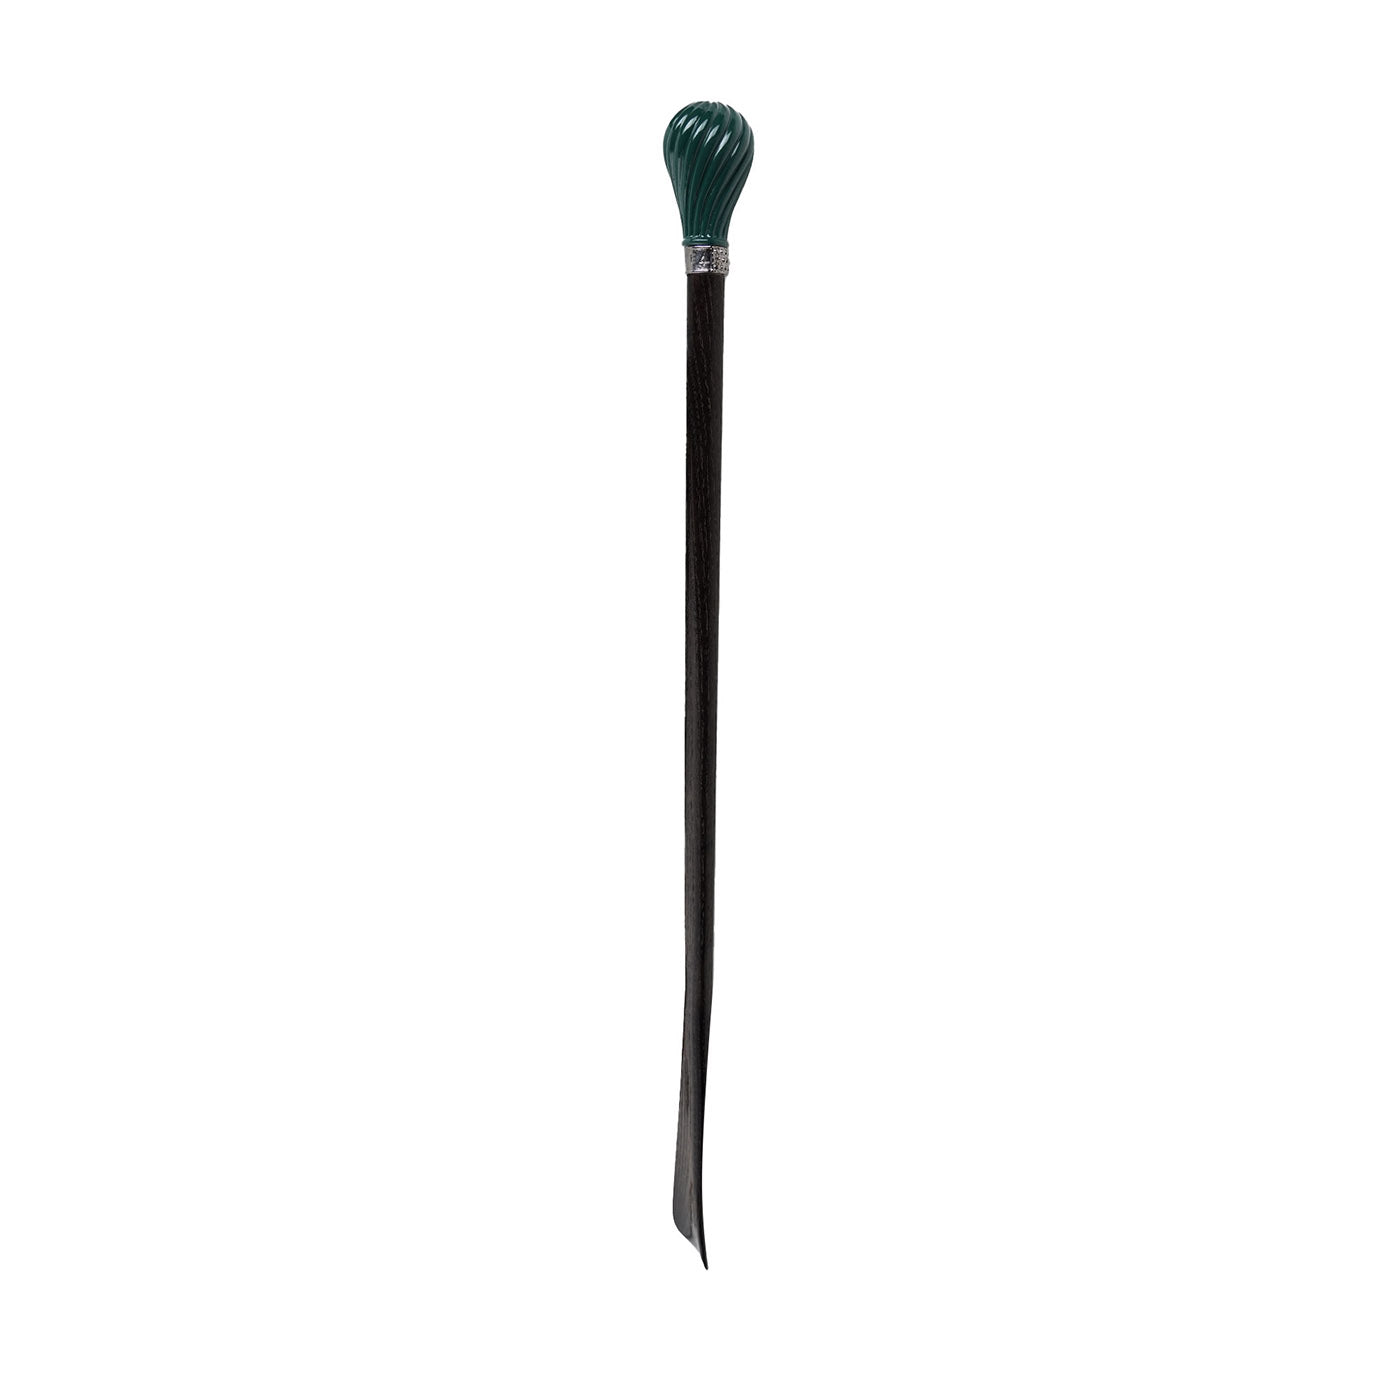 Sagola Dark Shoe Horn with Twisted Petrol-Blue Handle - Main view